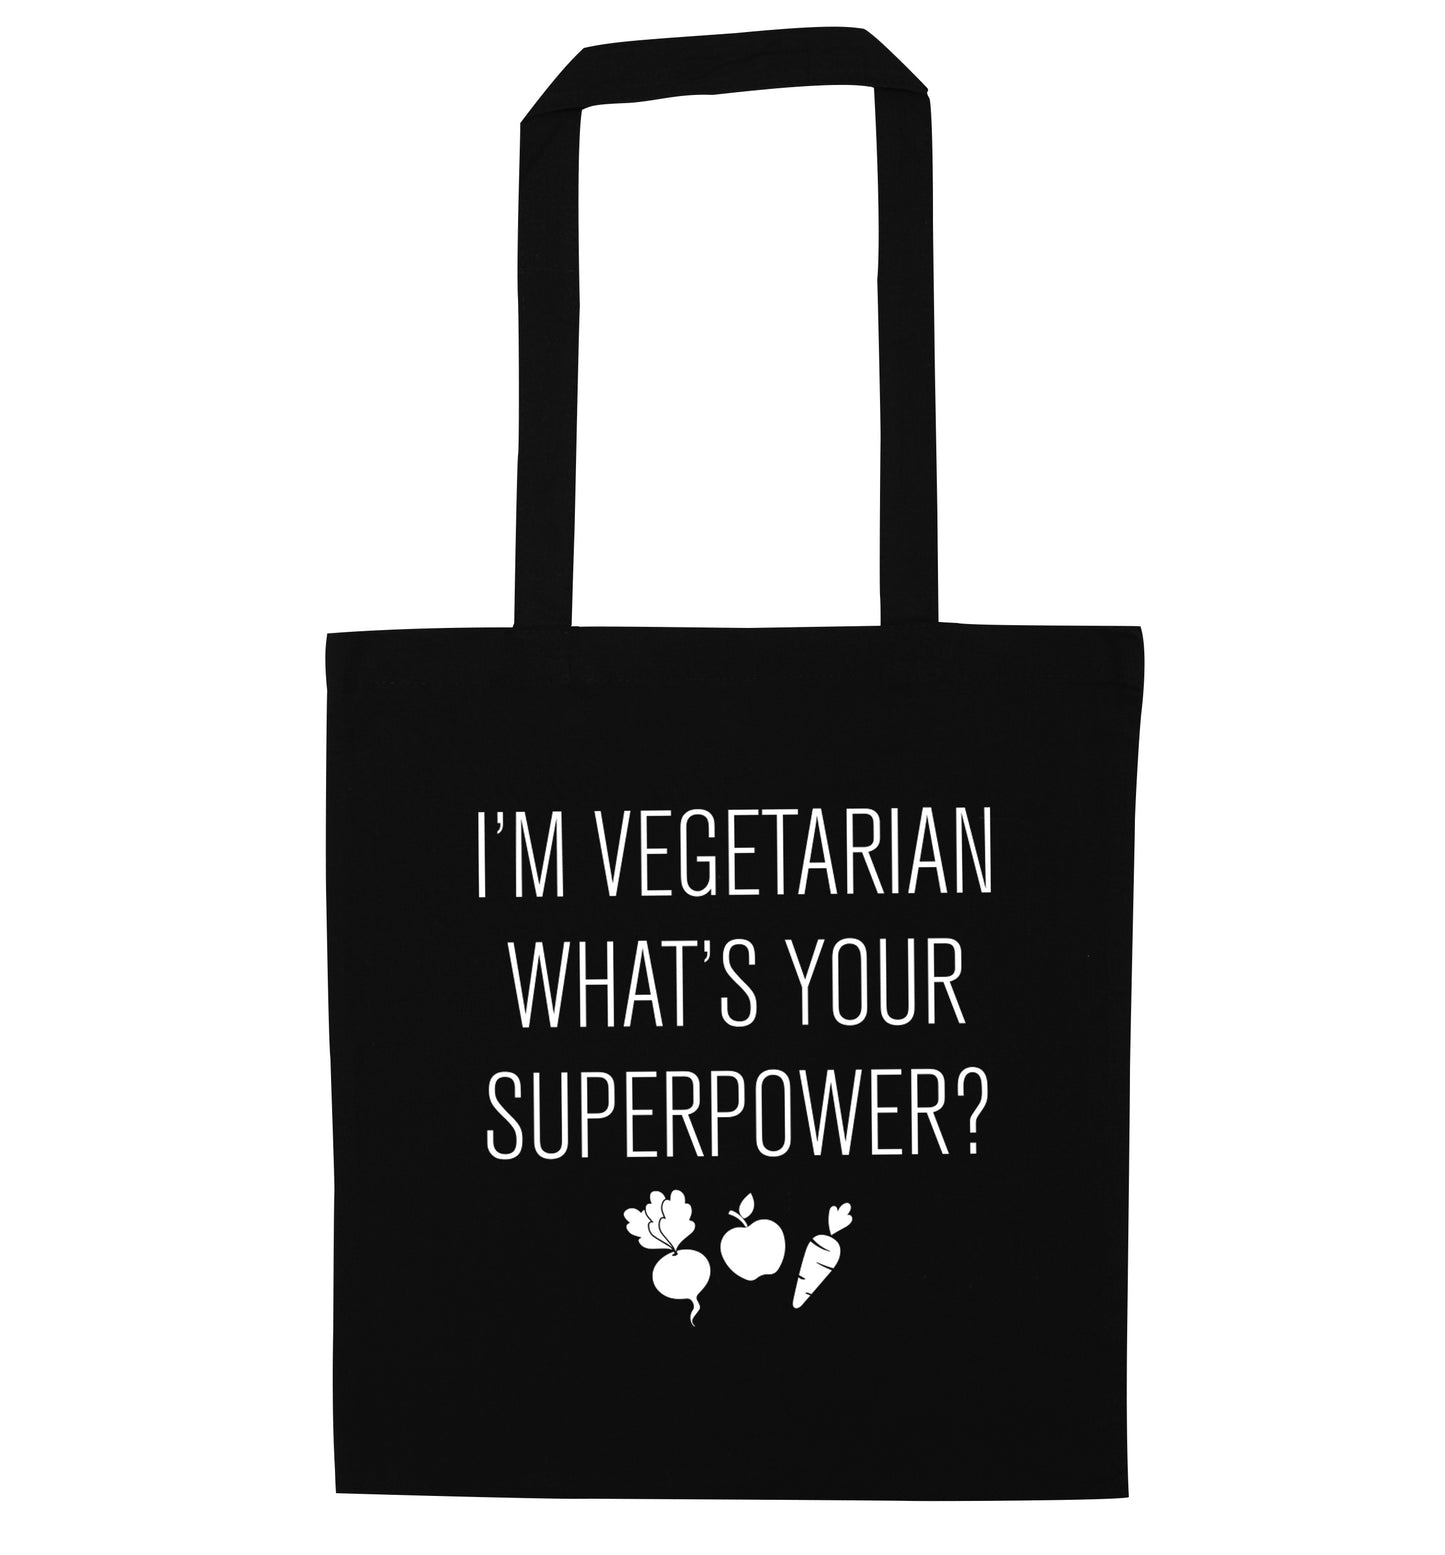 I'm vegetarian what's your superpower? black tote bag